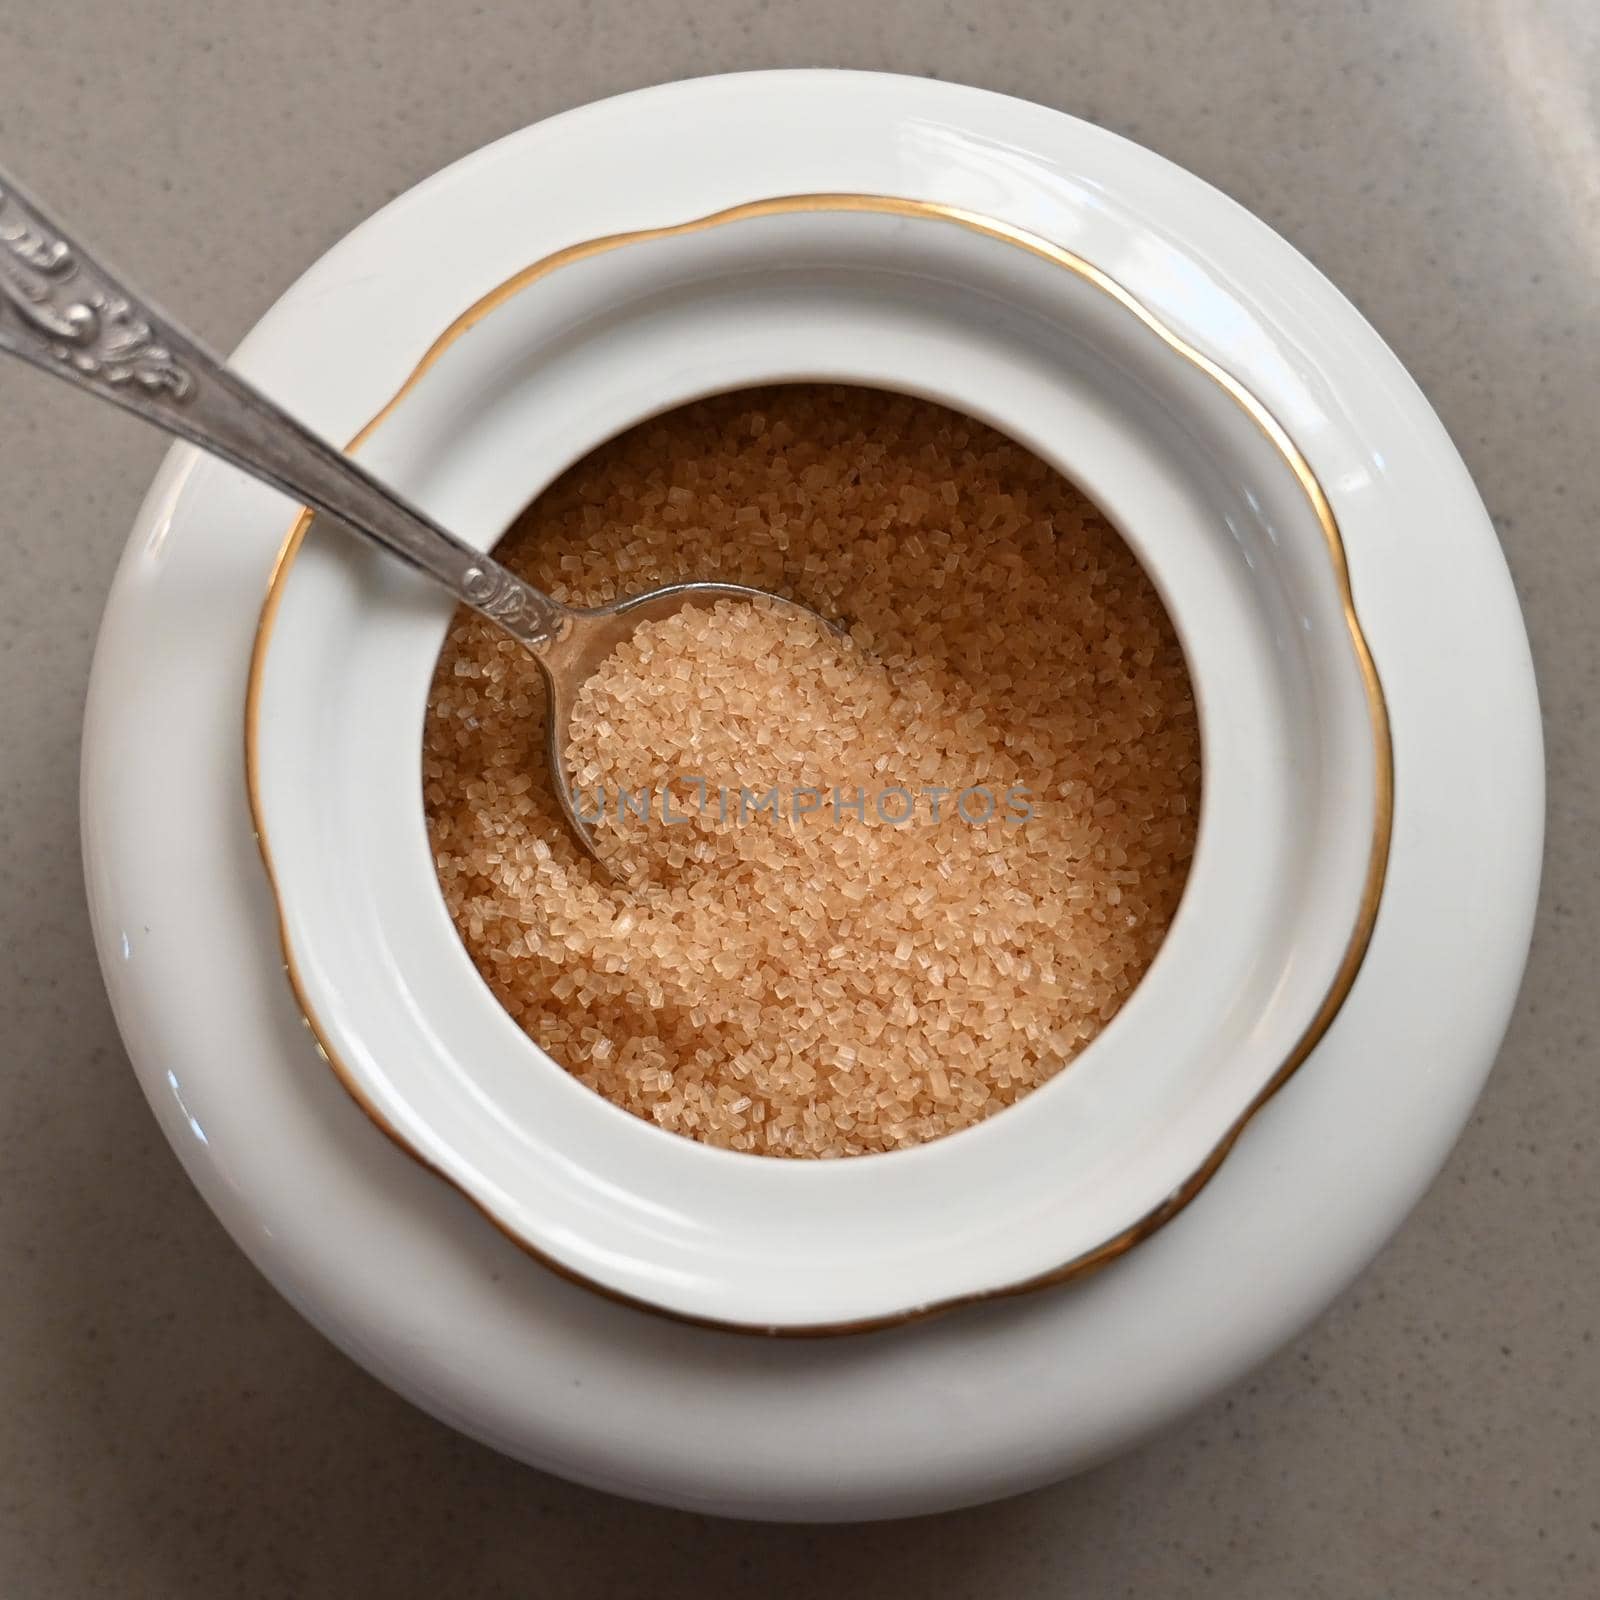 Cane sugar in a porcelain sugar bowl with a spoon close-up